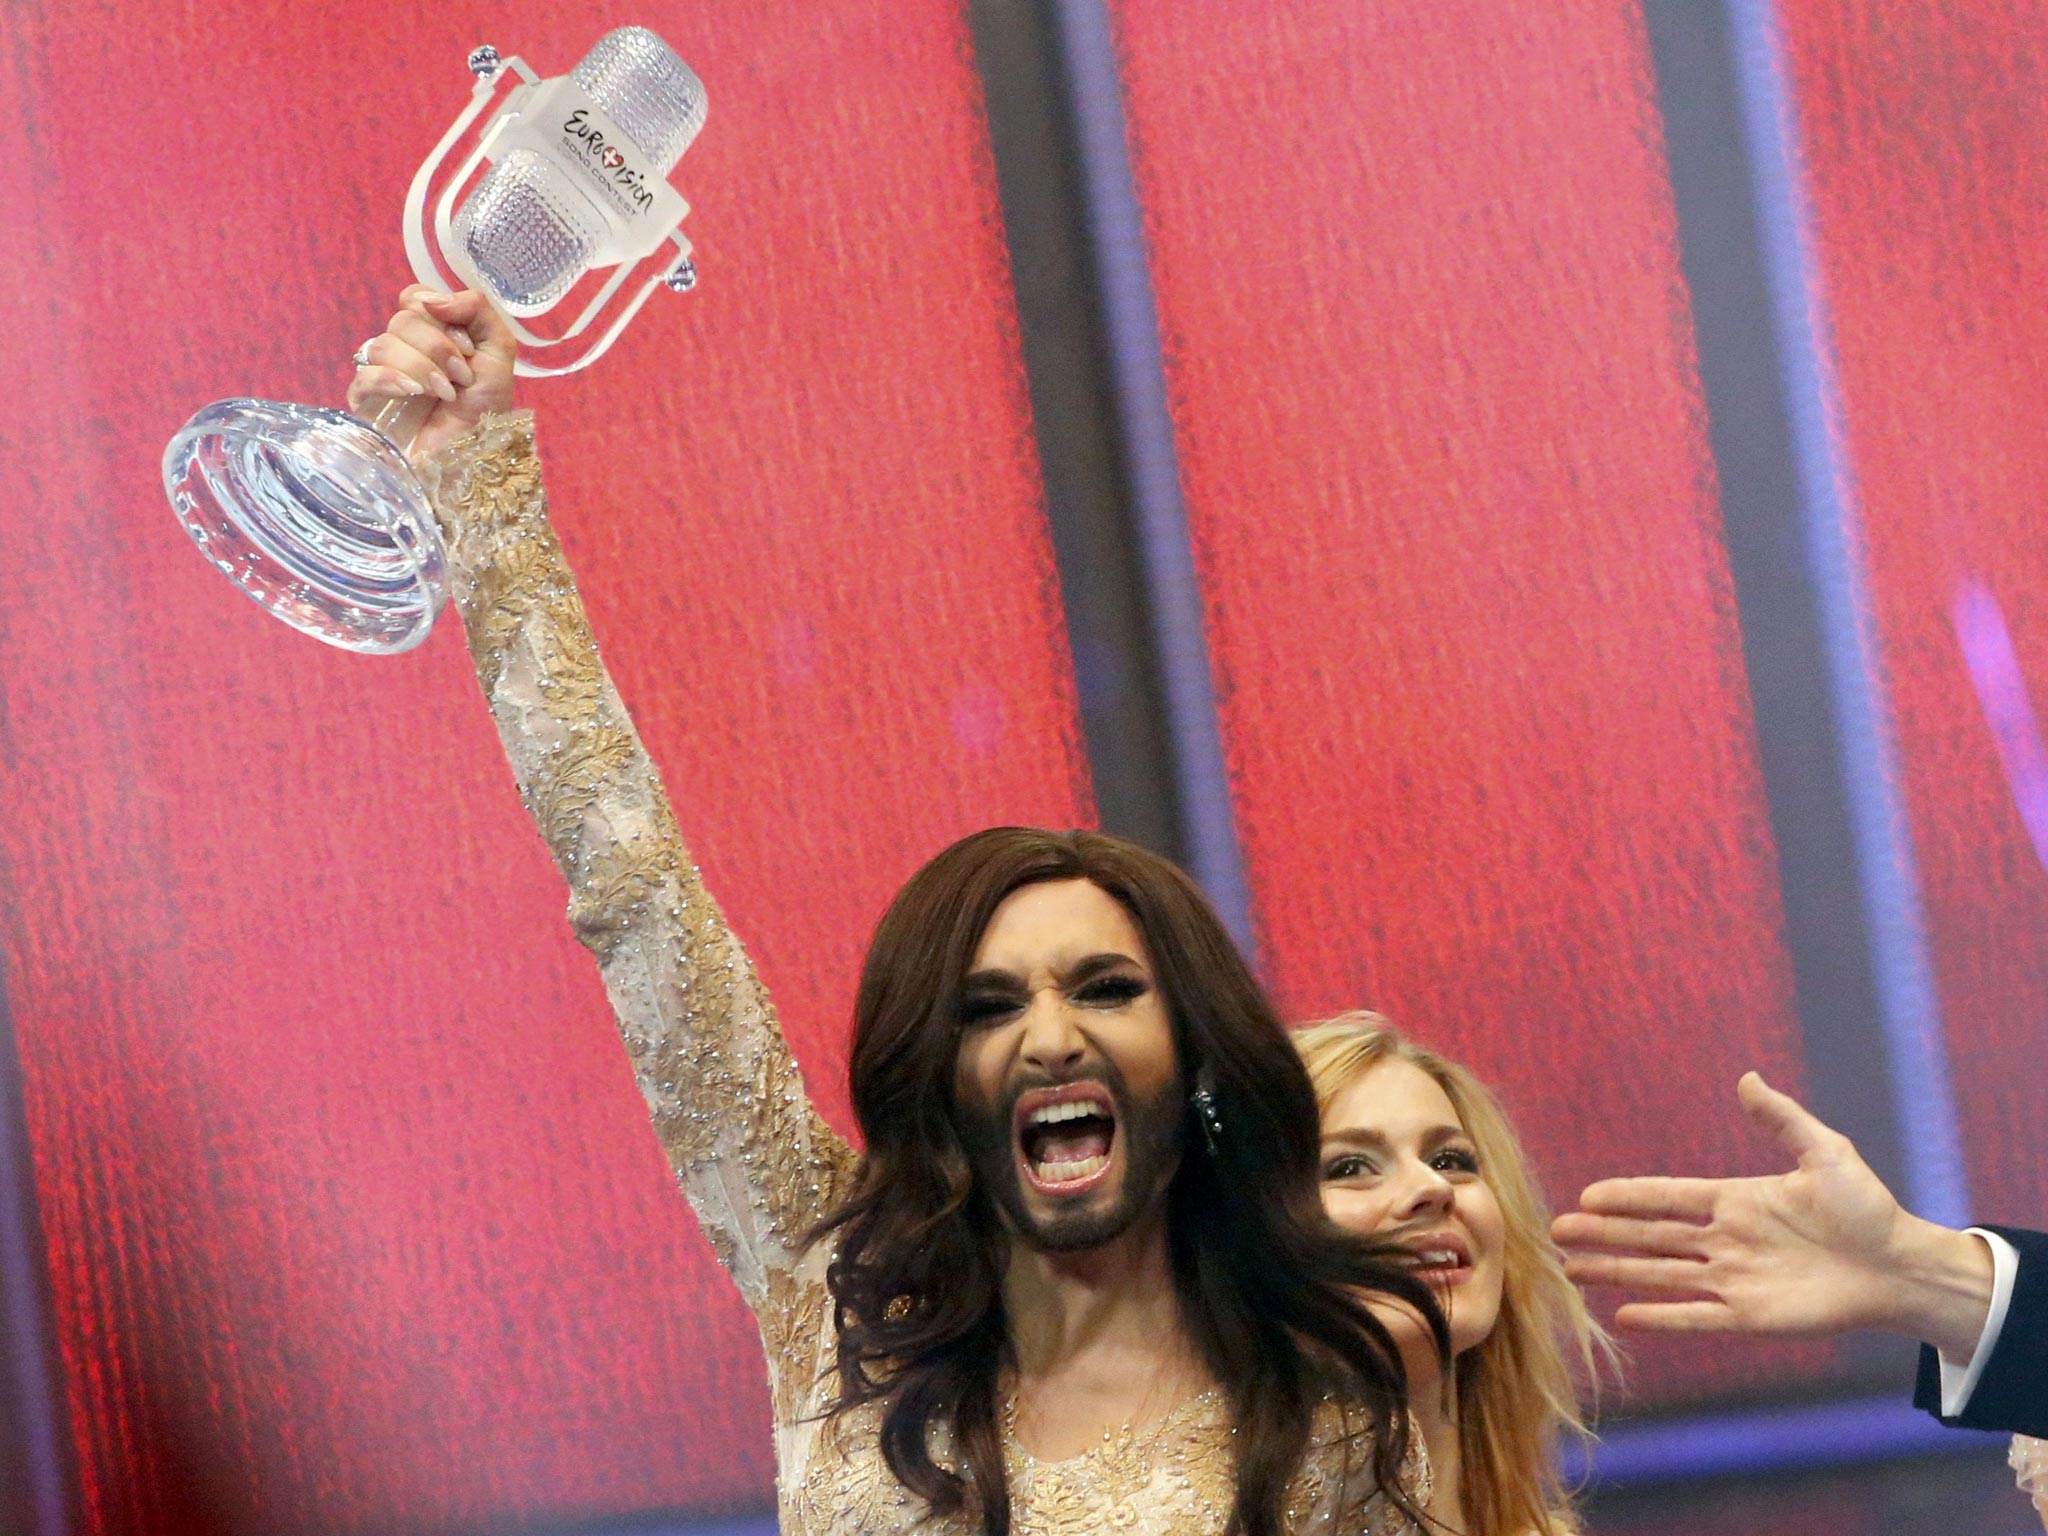 Conchita Wurst representing Austria celebrates after winning the grand final of the 59th Eurovision Song Contest